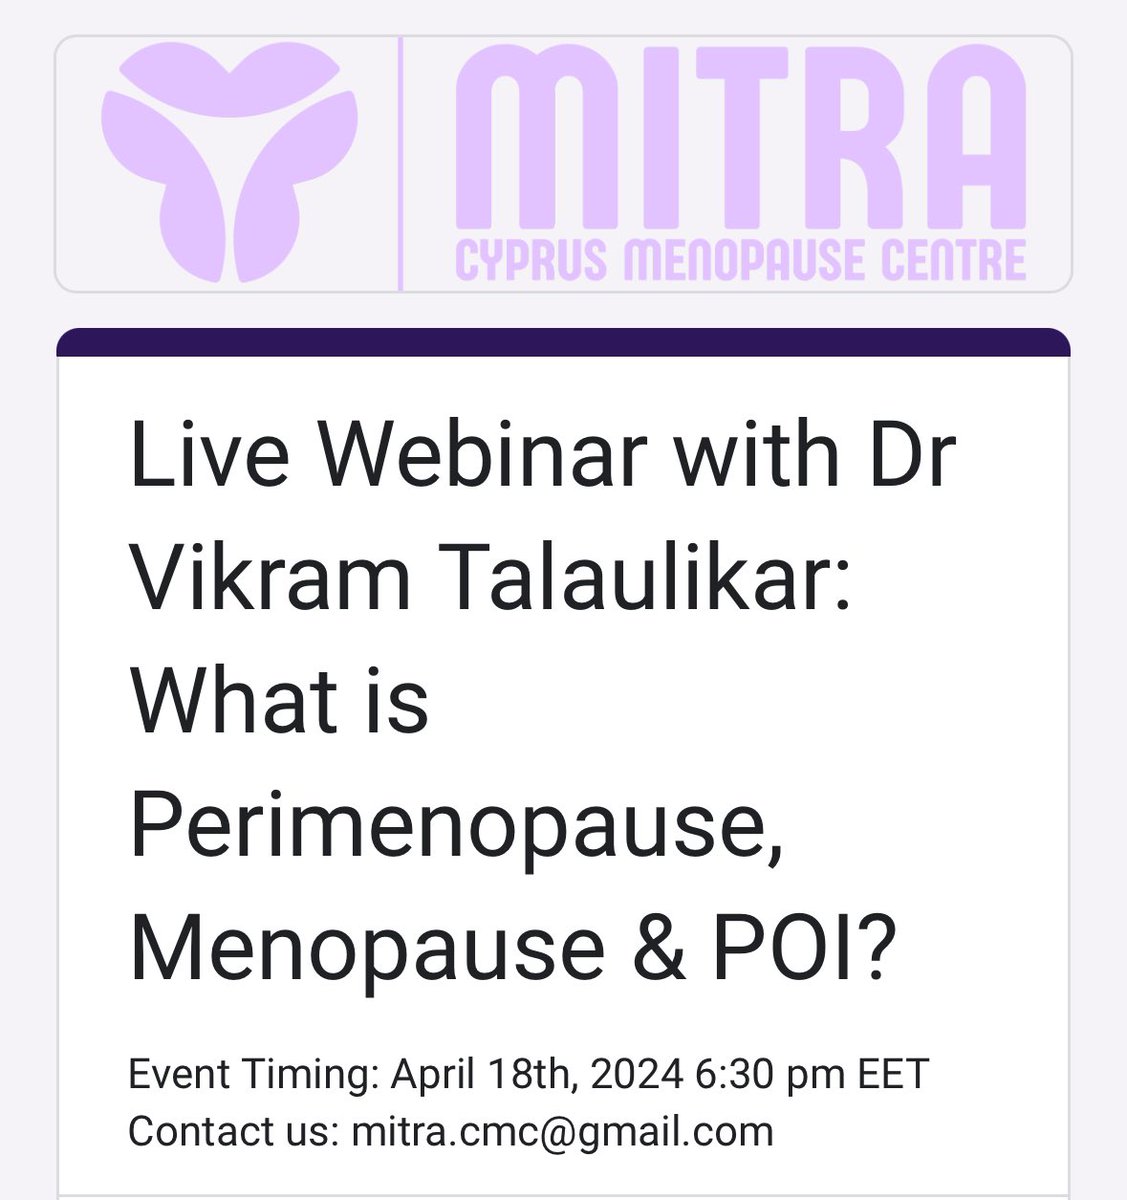 Join me & Kathy Kattashis from Cyprus on 18th April. Kathy founded Mitra - Cyprus Menopause Centre (a non-profit organisation) in 2022 which is dedicated to advocating for unbiased healthcare for menopause. Contact us: mitra.cmc@gmail.com or forms.gle/N6DwHjLBqeV42V…